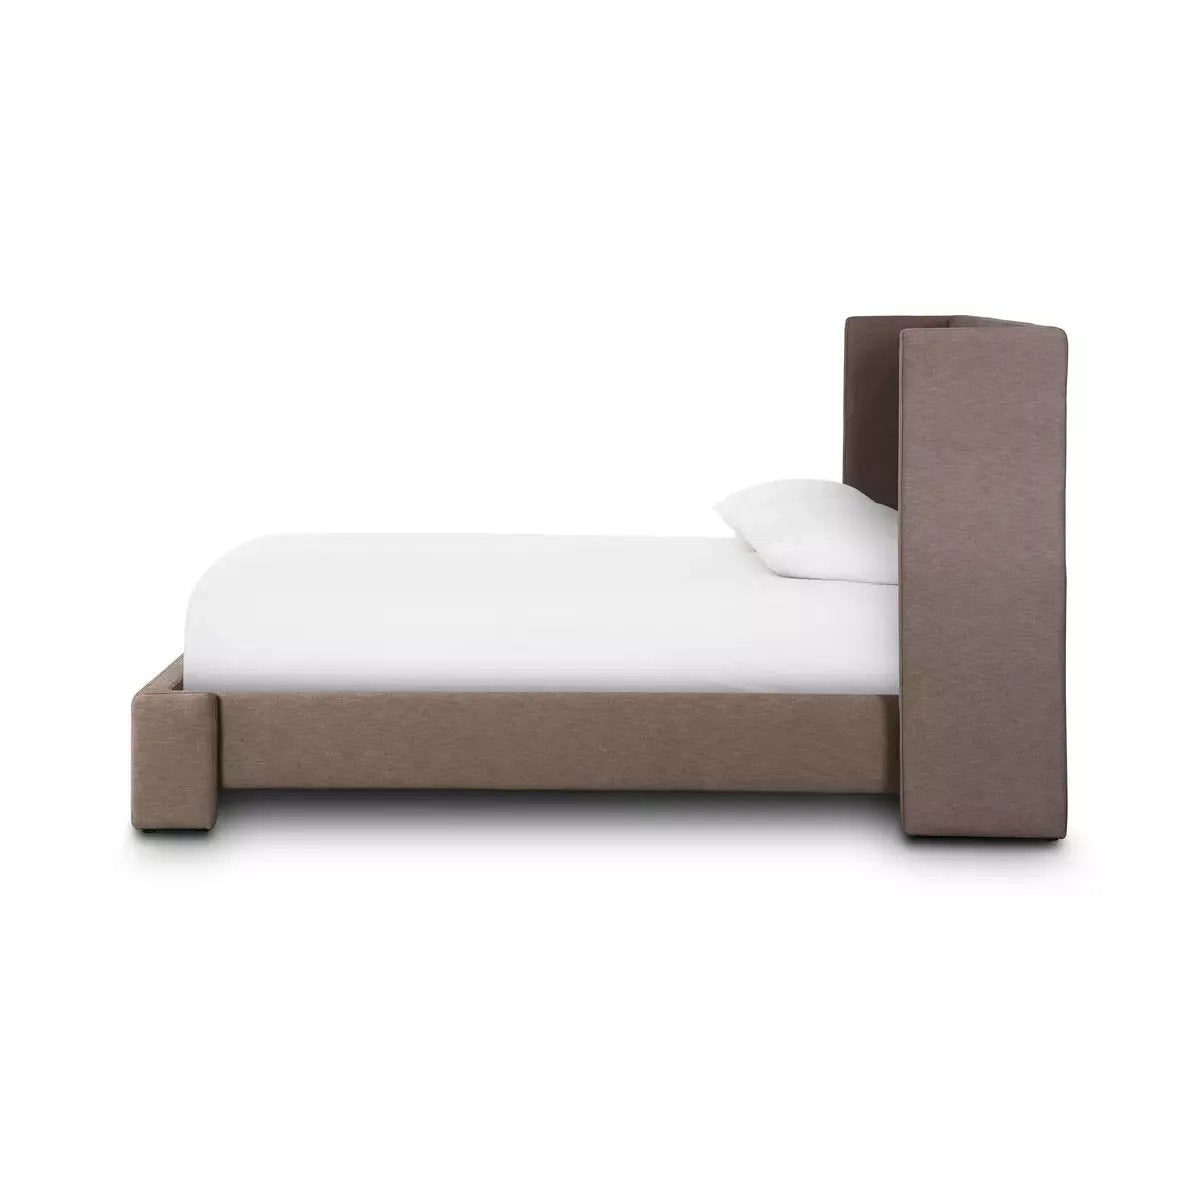 A shorter wingspan and geometric cutouts define this modern-day shelter wingback bed, designed for comfort from every angle. Upholstered in a natural taupe fabric with subtle texture and a soft hand.Collection: Norwoo Amethyst Home provides interior design, new home construction design consulting, vintage area rugs, and lighting in the Miami metro area.